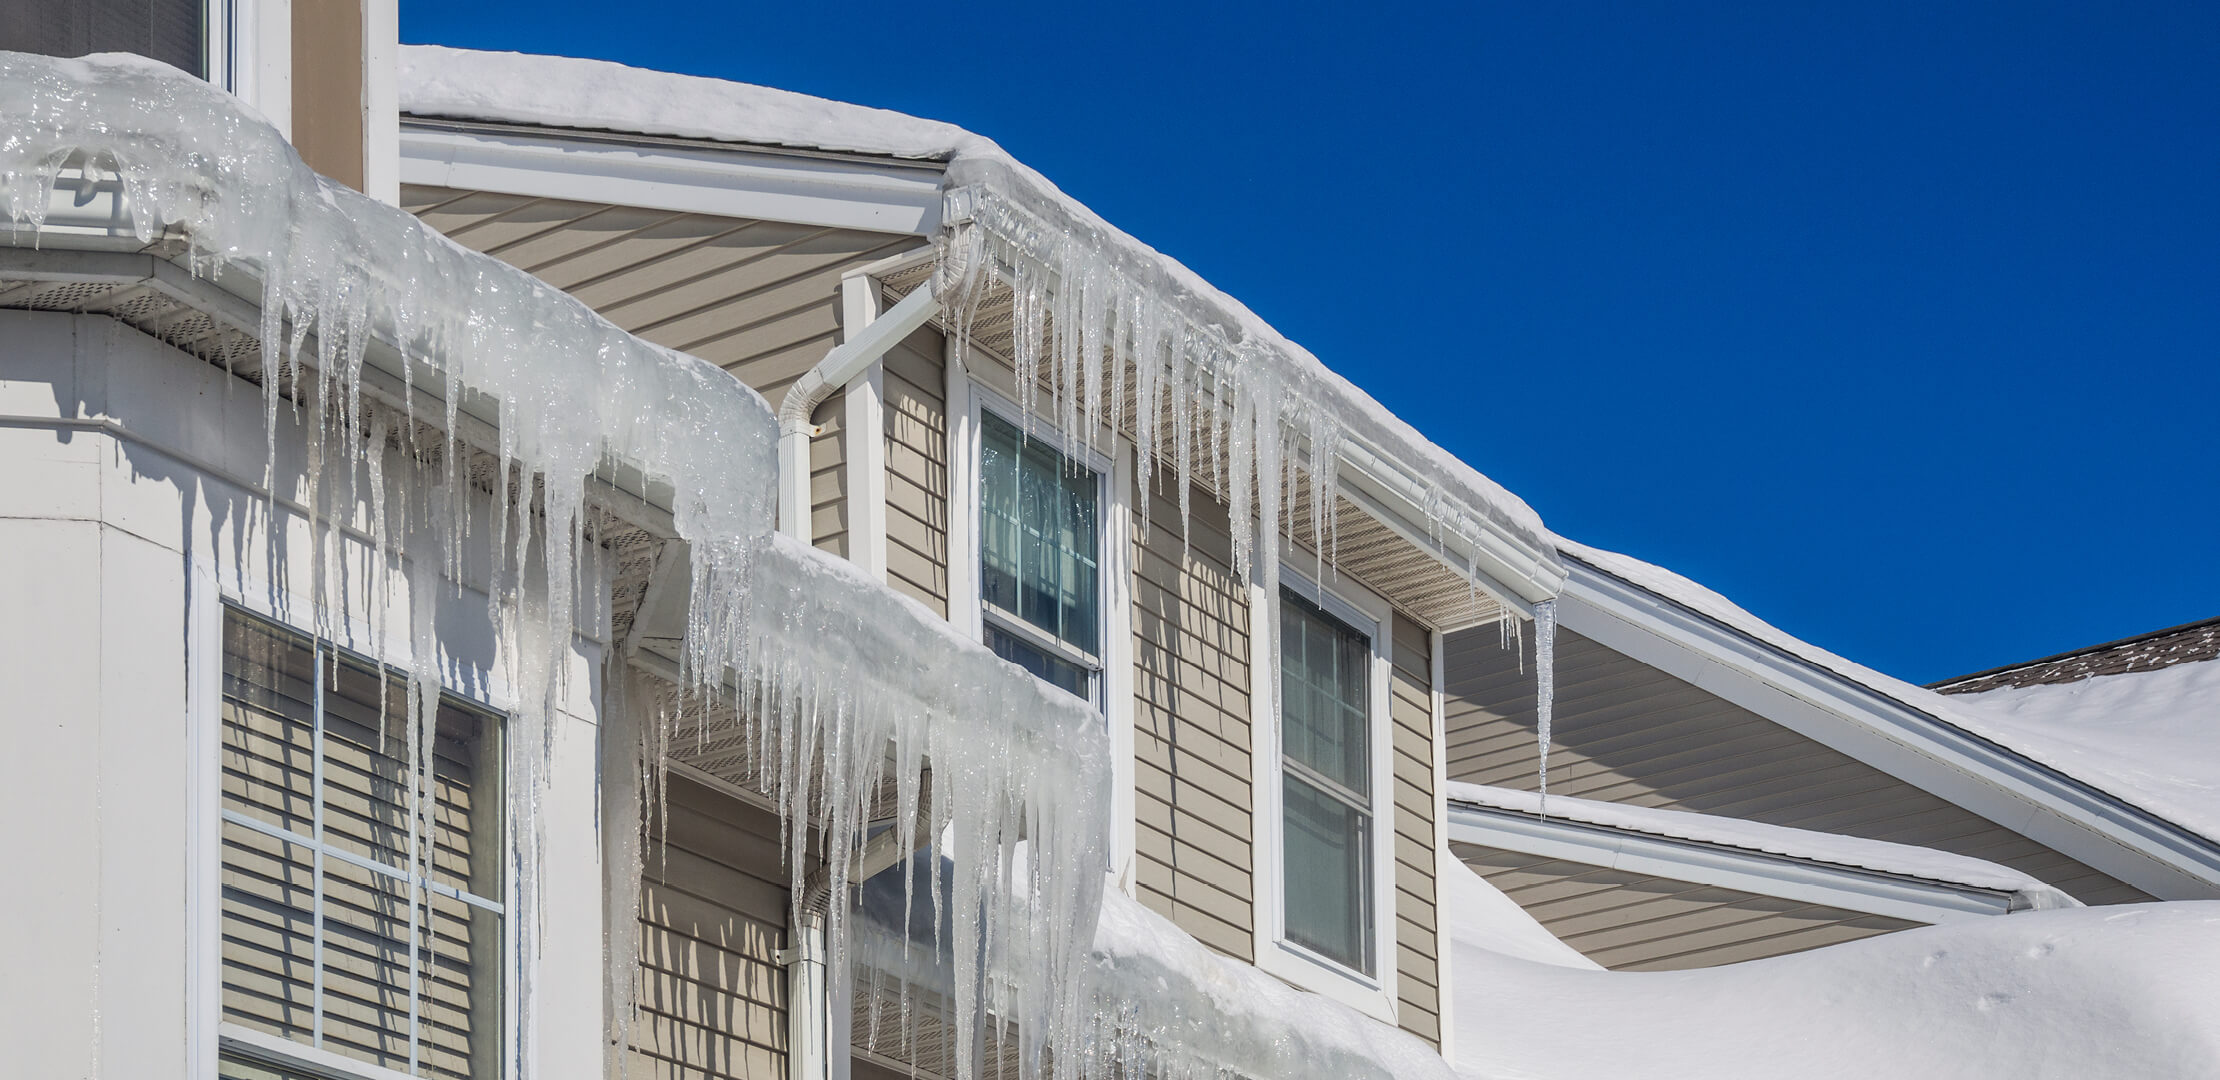 Ice dams with icicles overflowing the gutters on a house